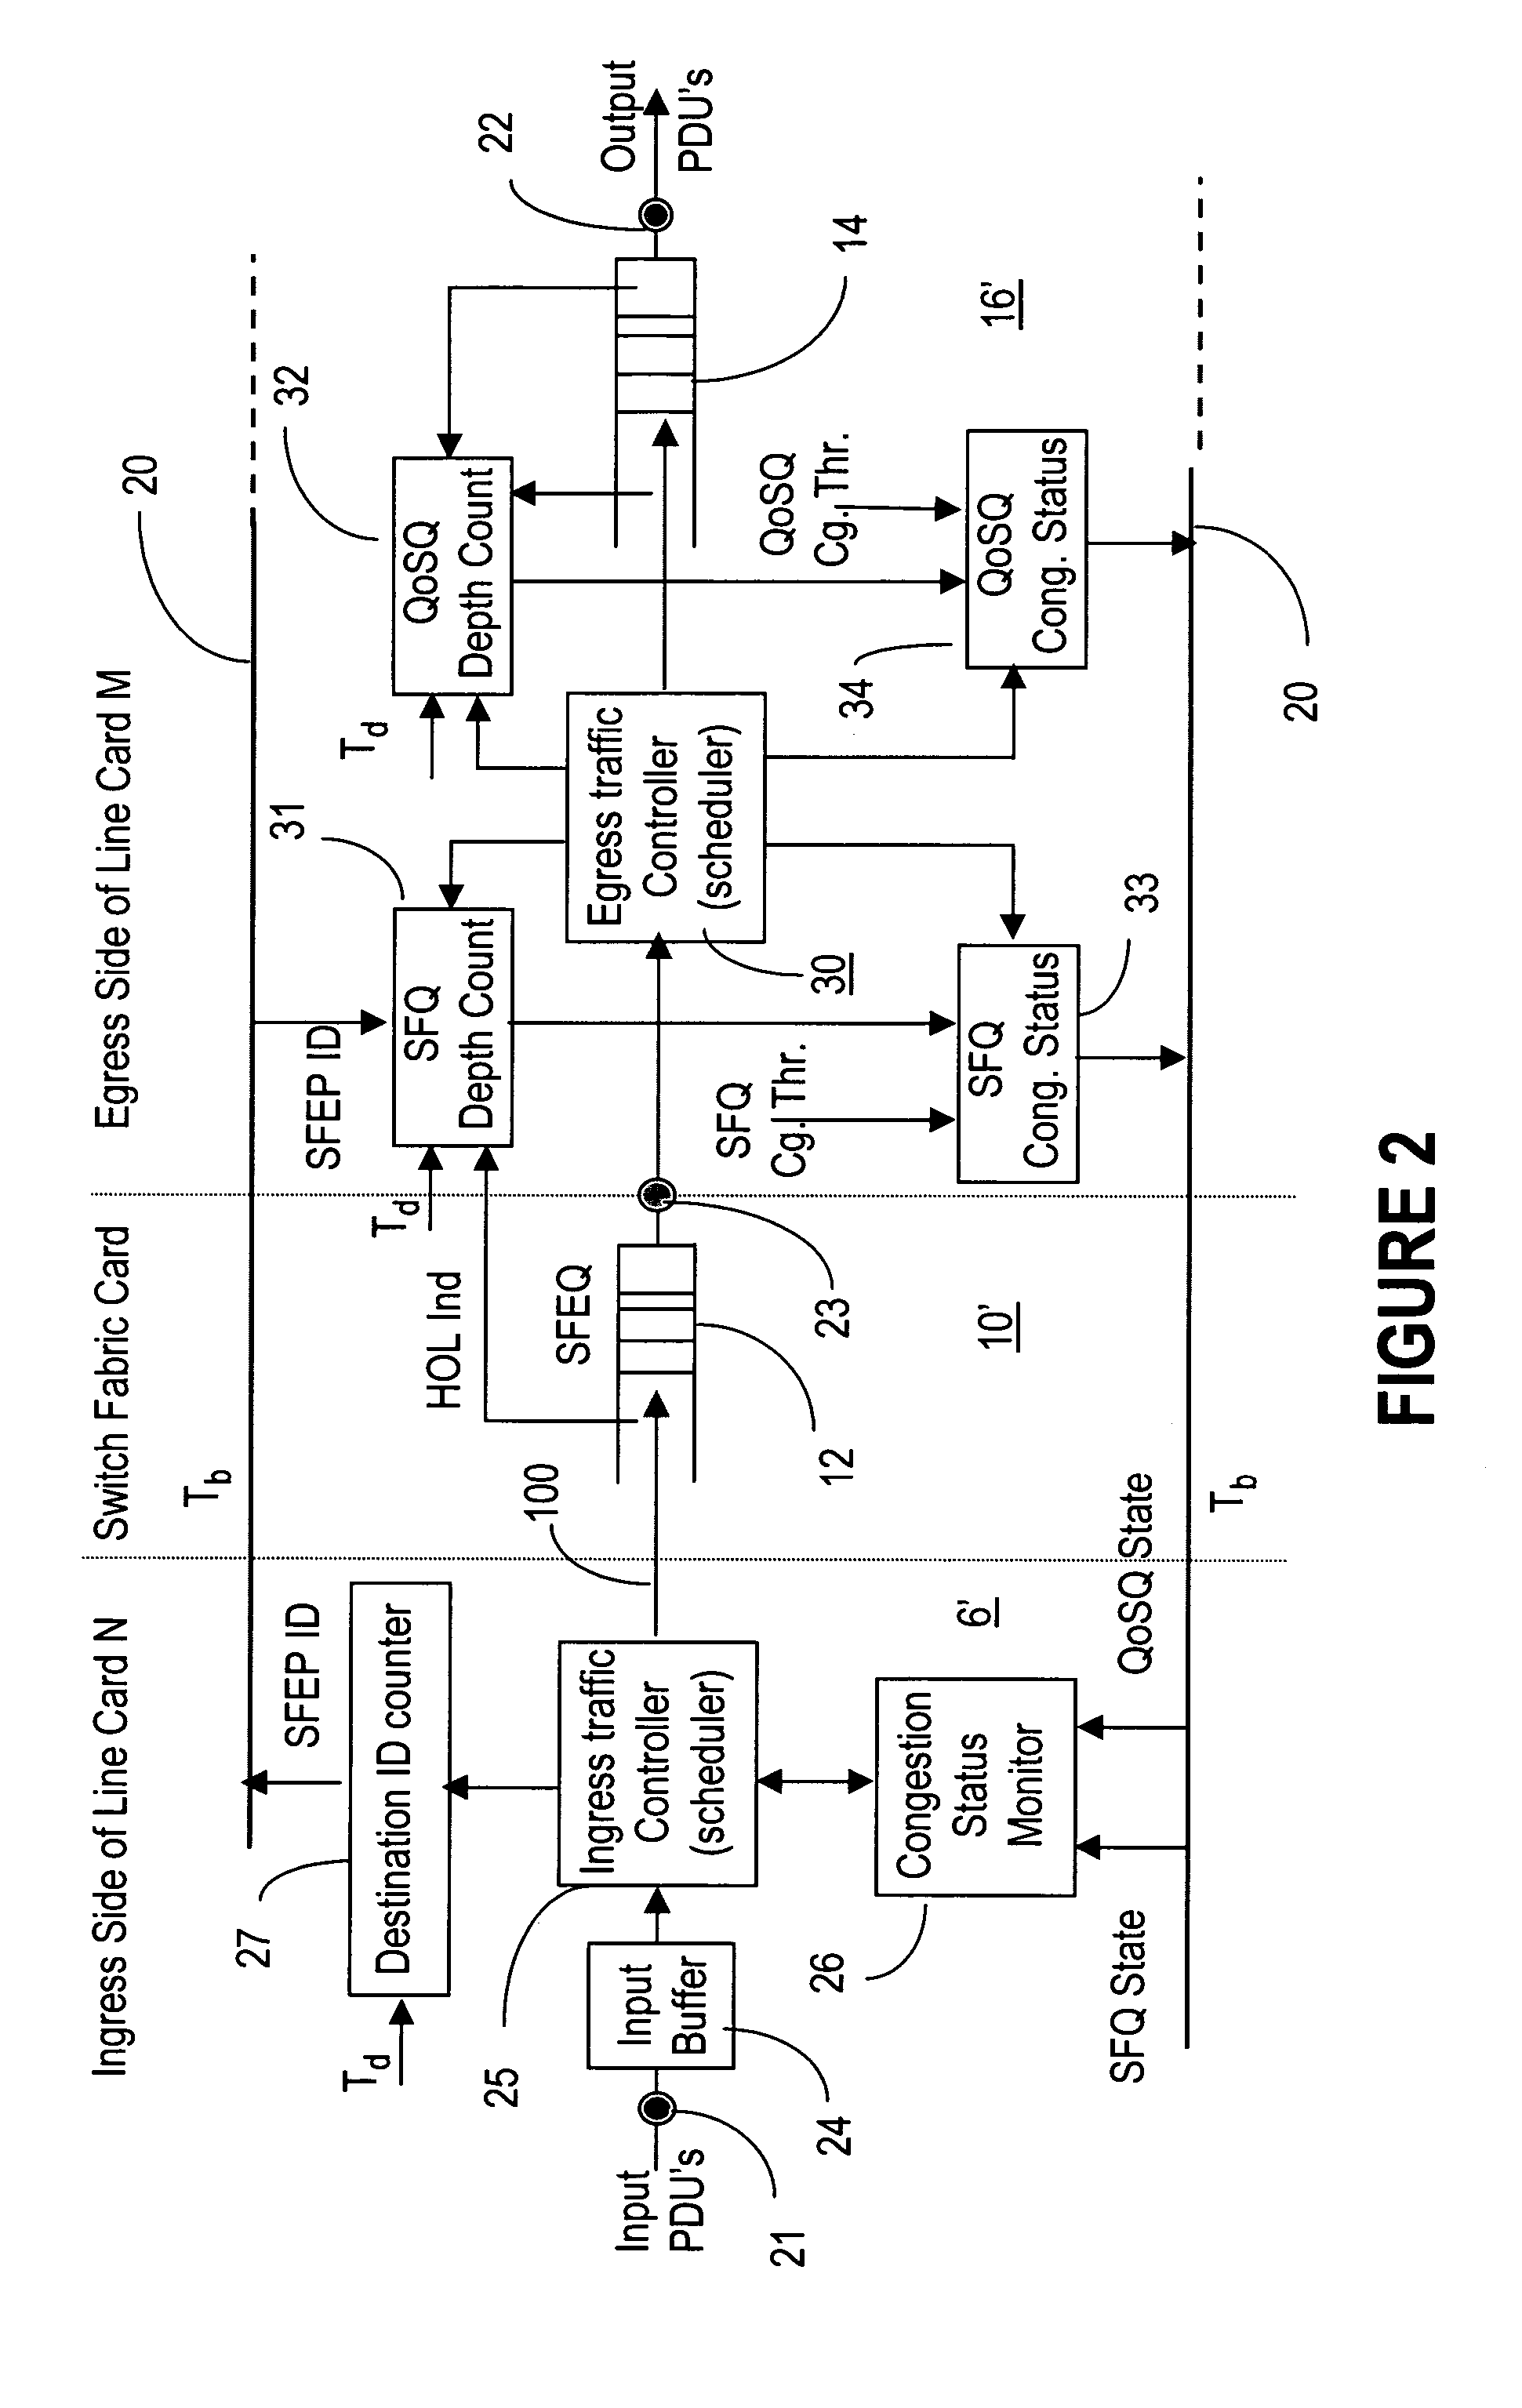 Method and apparatus for closed loop, out-of-band backpressure mechanism